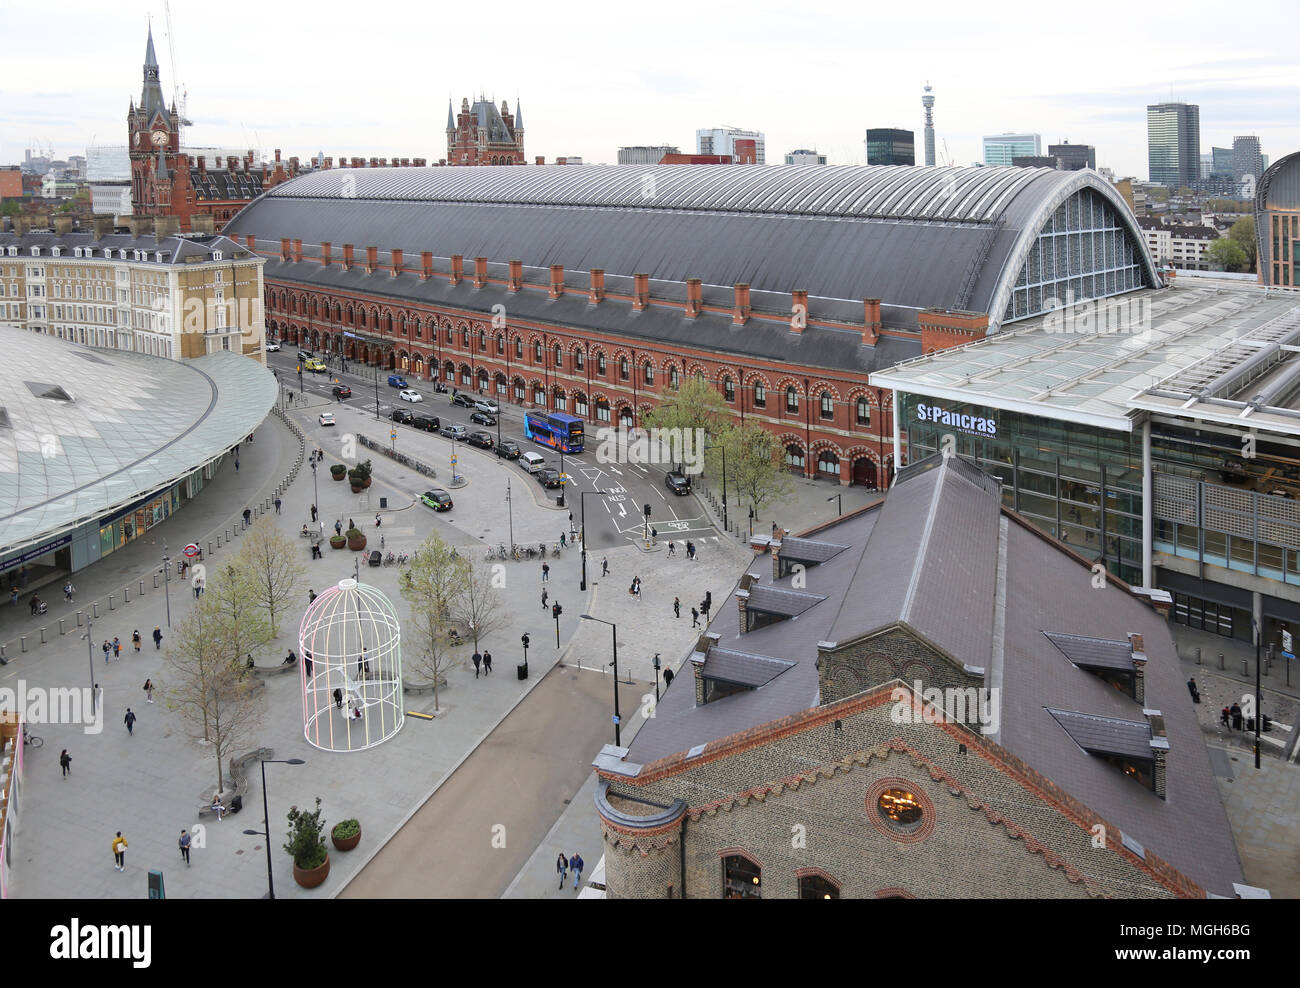 High level view of St Pancras Station, London. Shows old station (centre) new extension (right) & new Kings Cross concourse and piazza (centre & left) Stock Photo